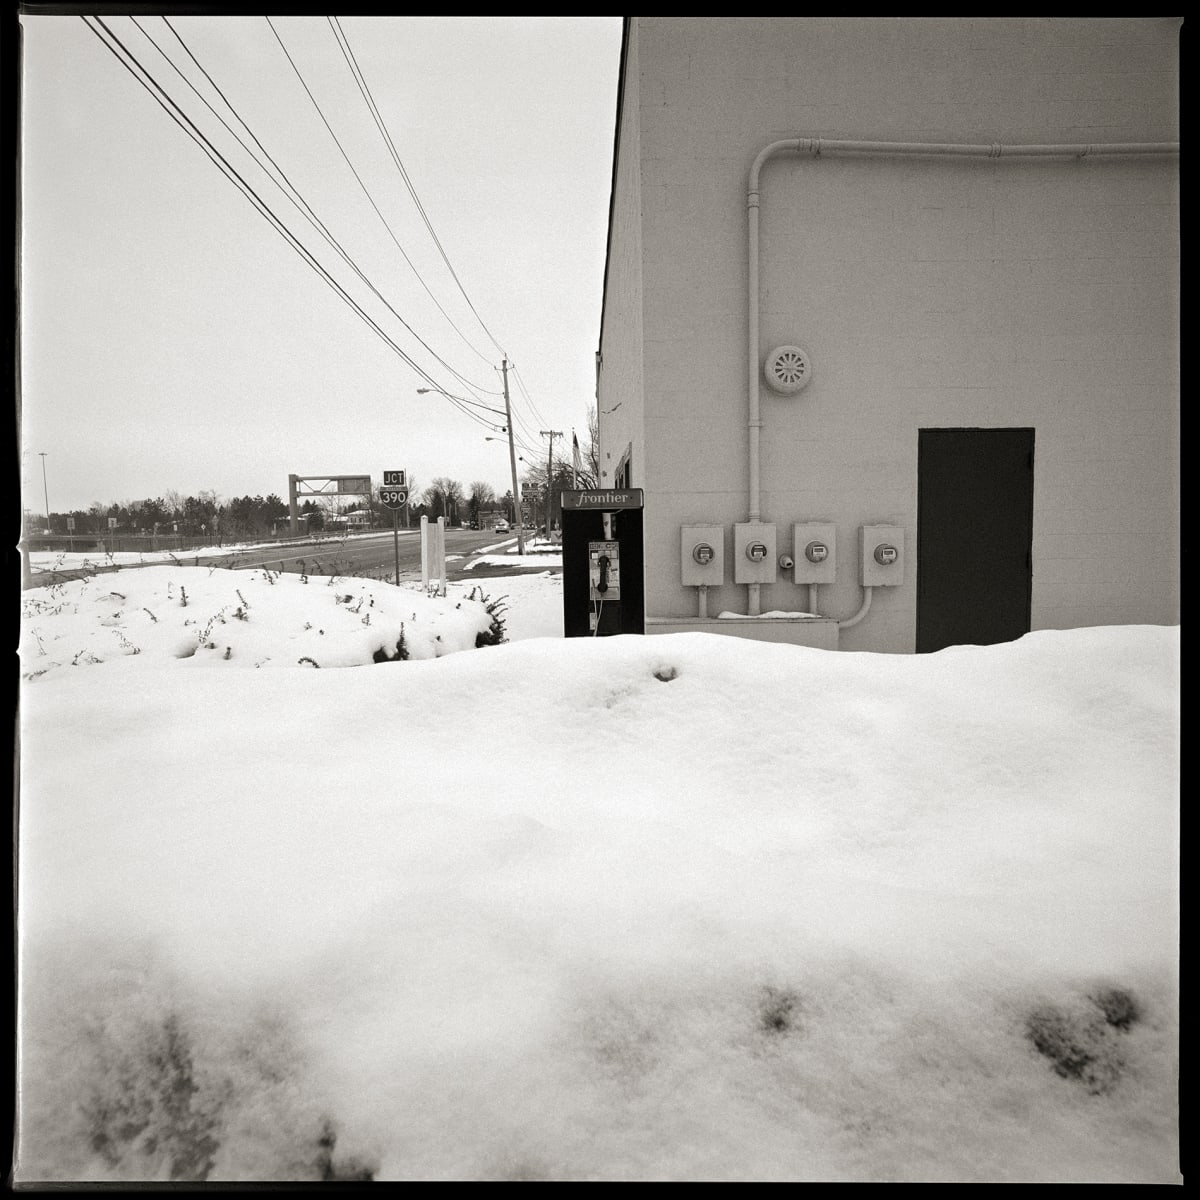 585.271.9607 – Red Apple Market #2025, 1835 Mt. Hope Avenue, Rochester, NY 14620 by Eric T. Kunsman  Image: ID: A black and white image shows a snow covered payphone to the left of a building.  The snow pile is from plowing the parking lot.  The building is a plain grey stucco building.